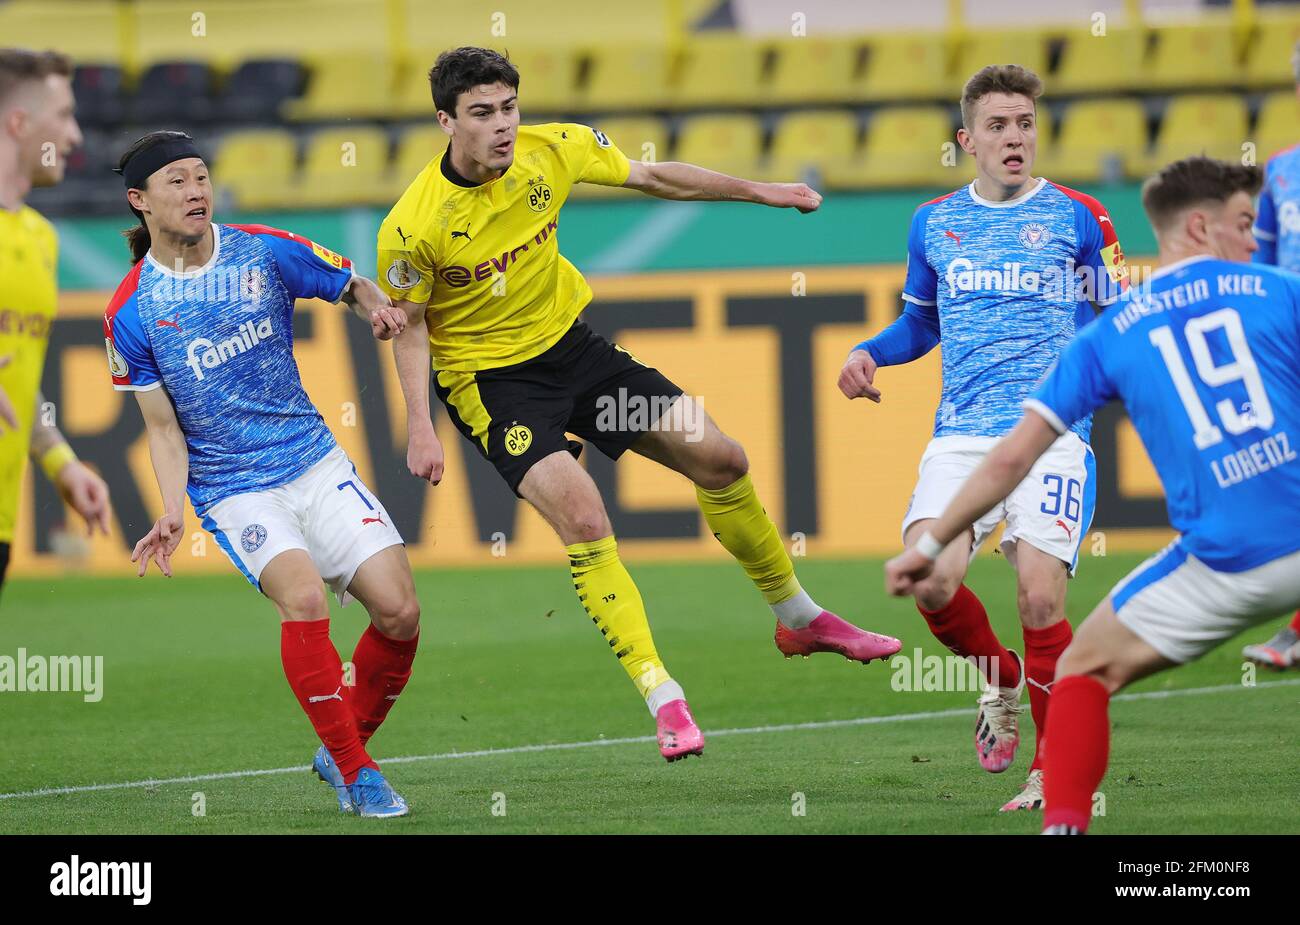 Giovanni REYNA (DO) shoots the goal to 1: 0 versus Jae Sung LEE (KI), action, football DFB Pokal, semi-finals, Borussia Dortmund (DO) - Holstein Kiel (KI) 5: 0, on May 1st, 2021 in Dortmund/Germany. Photo: Ralf Ibing/firo Sportphoto/pool via Fotoagentur SVEN SIMON # DFB regulations prohibit any use of photographs as image sequences and/or quasi-video # Editorial Use ONLY # National and International News Agencies OUT | usage worldwide Stock Photo